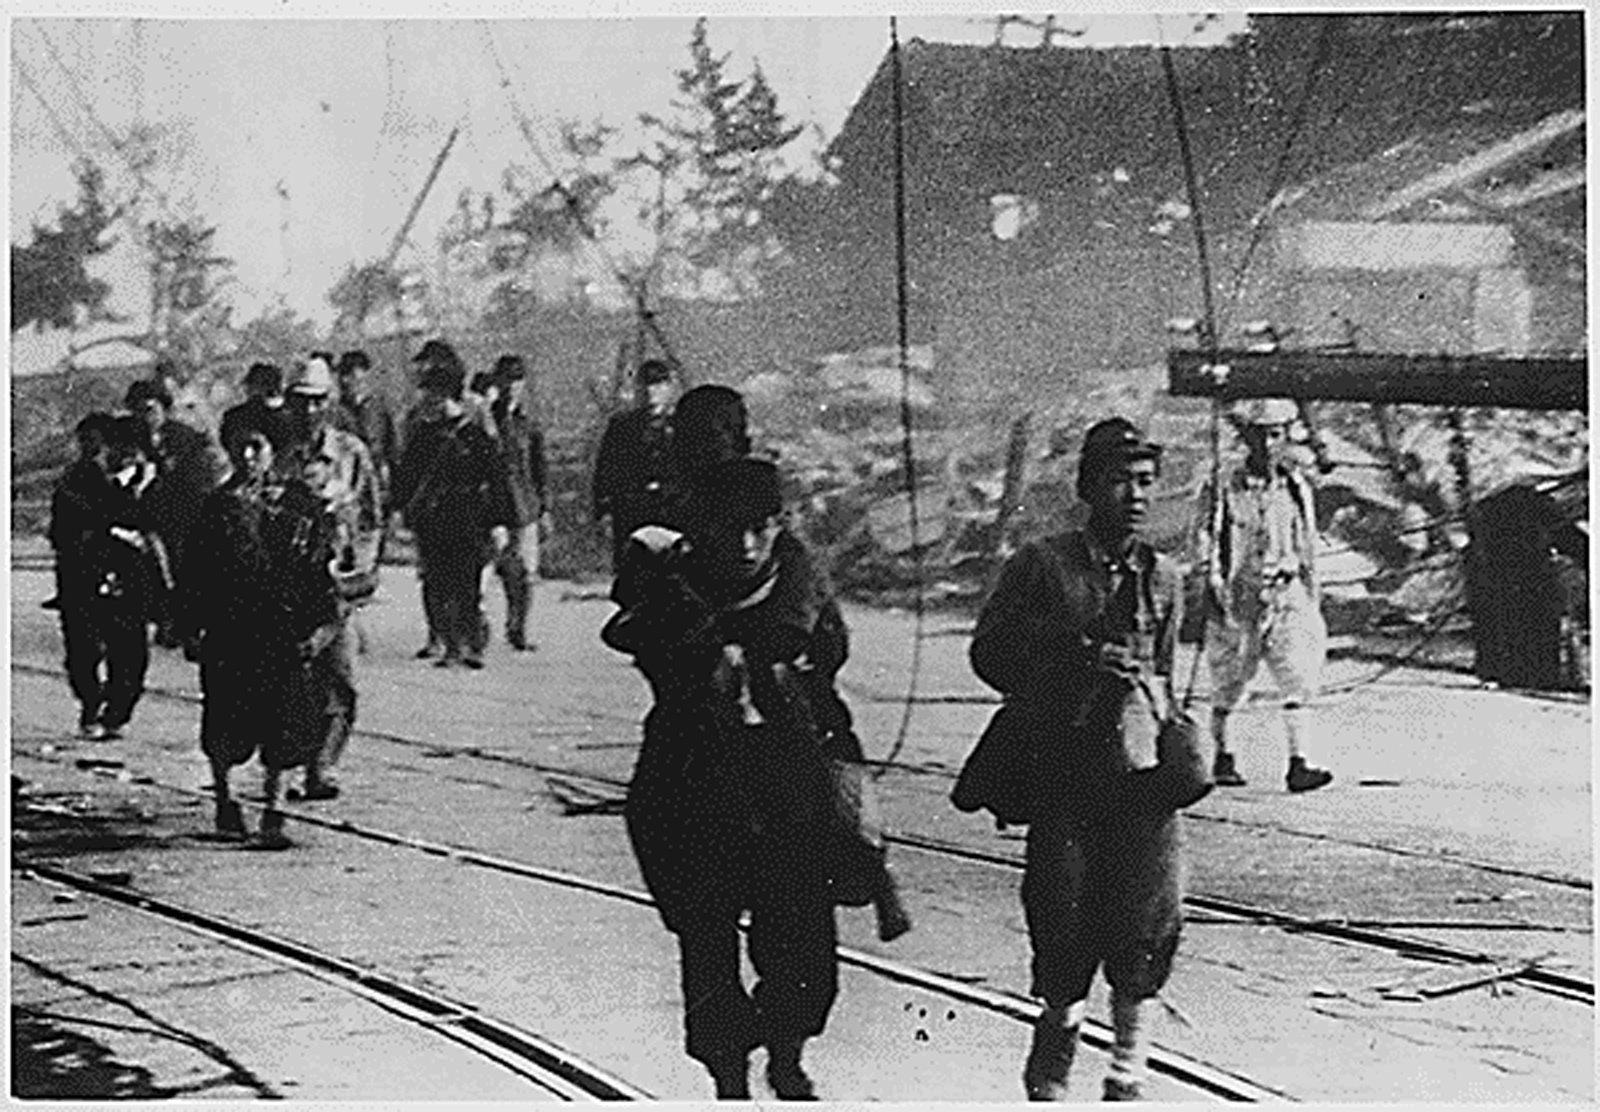 epa04867686 An undated handout image made available by the US National Archives and Records Administration (NARA) of survivors moving along the road after the atomic bombing of Nagasaki, Japan, in August 1945. 06 August 2015 marks the 70th anniversary of the atomic bombing on Hiroshima. The US B-29 Superfortress bomber Enola Gay dropped an atomic bomb codenamed 'Little Boy' on Hiroshima on 06 August 1945, killing tens of thousands of people in seconds. By the end of the year, 140,000 people had died from the effects of the bomb. On 09 August 1945 a second atomic bomb was exploded over Nagasaki, killing more than 73,000 people. The 'Little Boy' was the first ever nuclear bomb dropped on a city and a crucial turn that led to Japan's surrender in WWII.  EPA/US NATIONAL ARCHIVES / HANDOUT  HANDOUT EDITORIAL USE ONLY